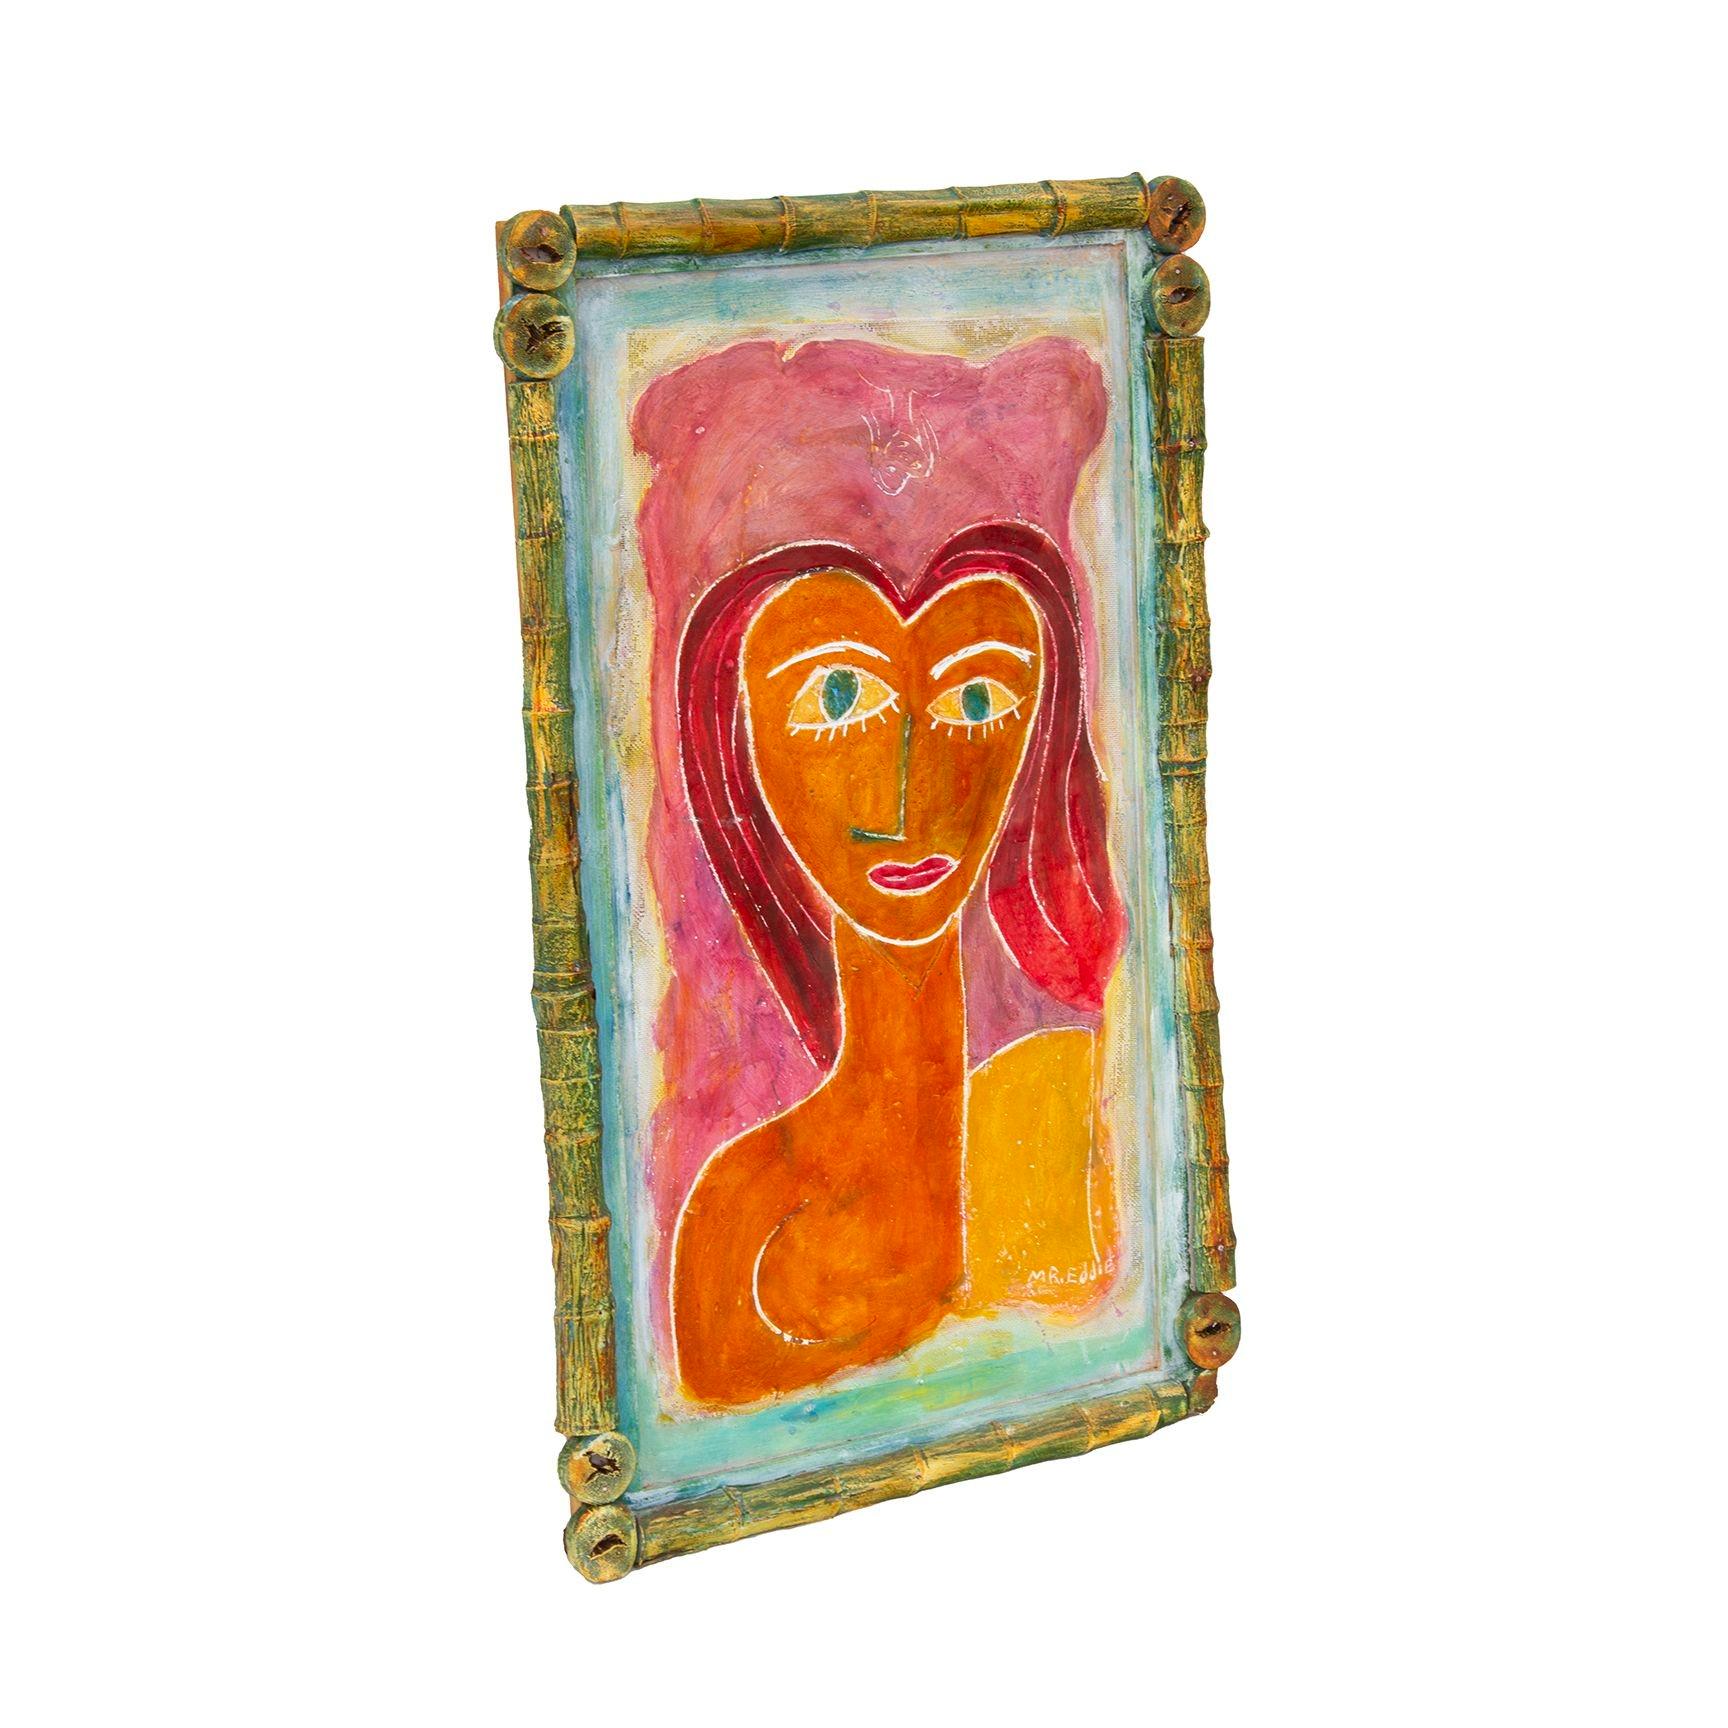 American, 1947
Colorful portrait in a mix of folk-pop art by American artist Edwin Weaver Jr, or 'Mr. Eddie', framed in cut bamboo. Bright color and texture define this framed fresco. 
Signed on the reverse:
Folk art fresco
Edwin H. Weaver Jr. 
Mr.